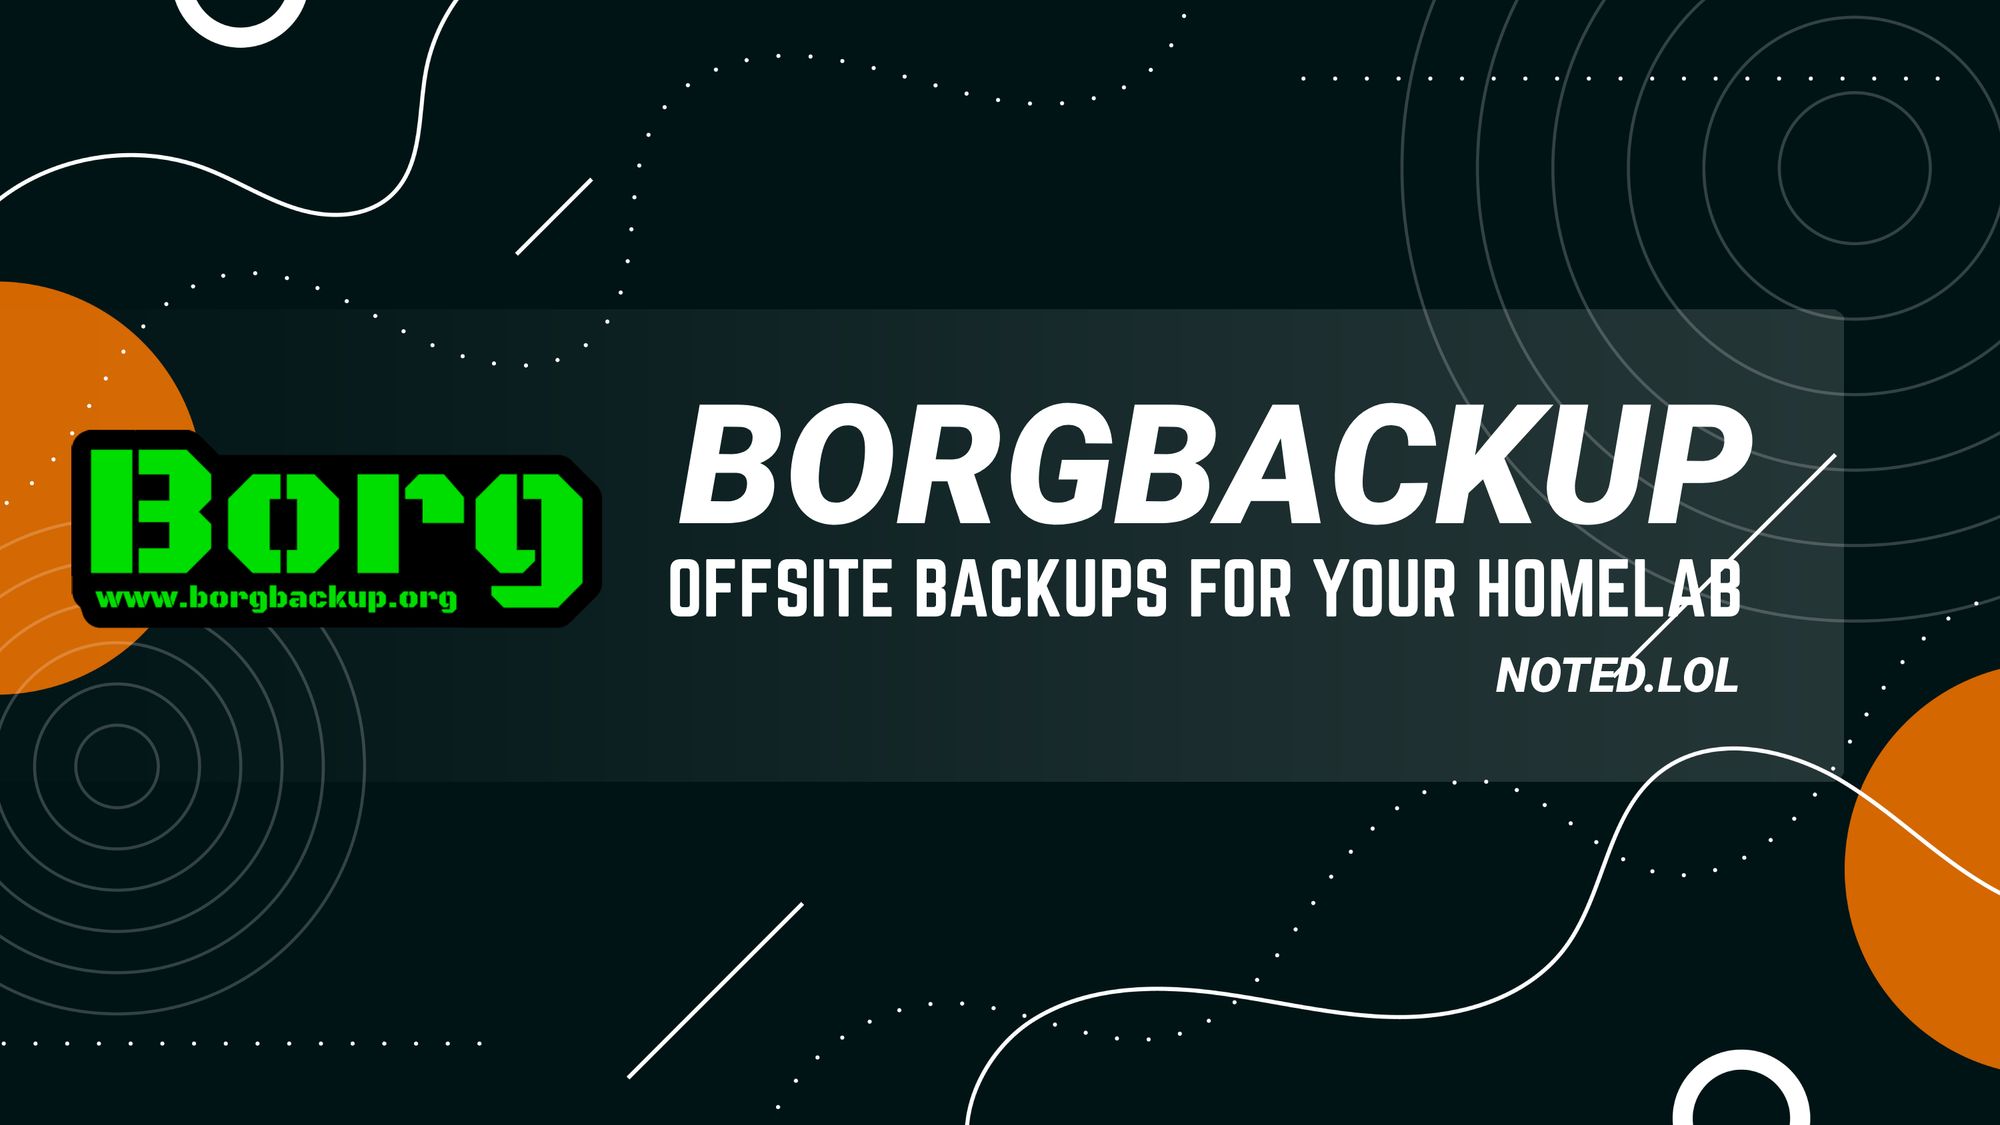 BorgBackup - Securely Backup your Homelab Offsite on a Schedule